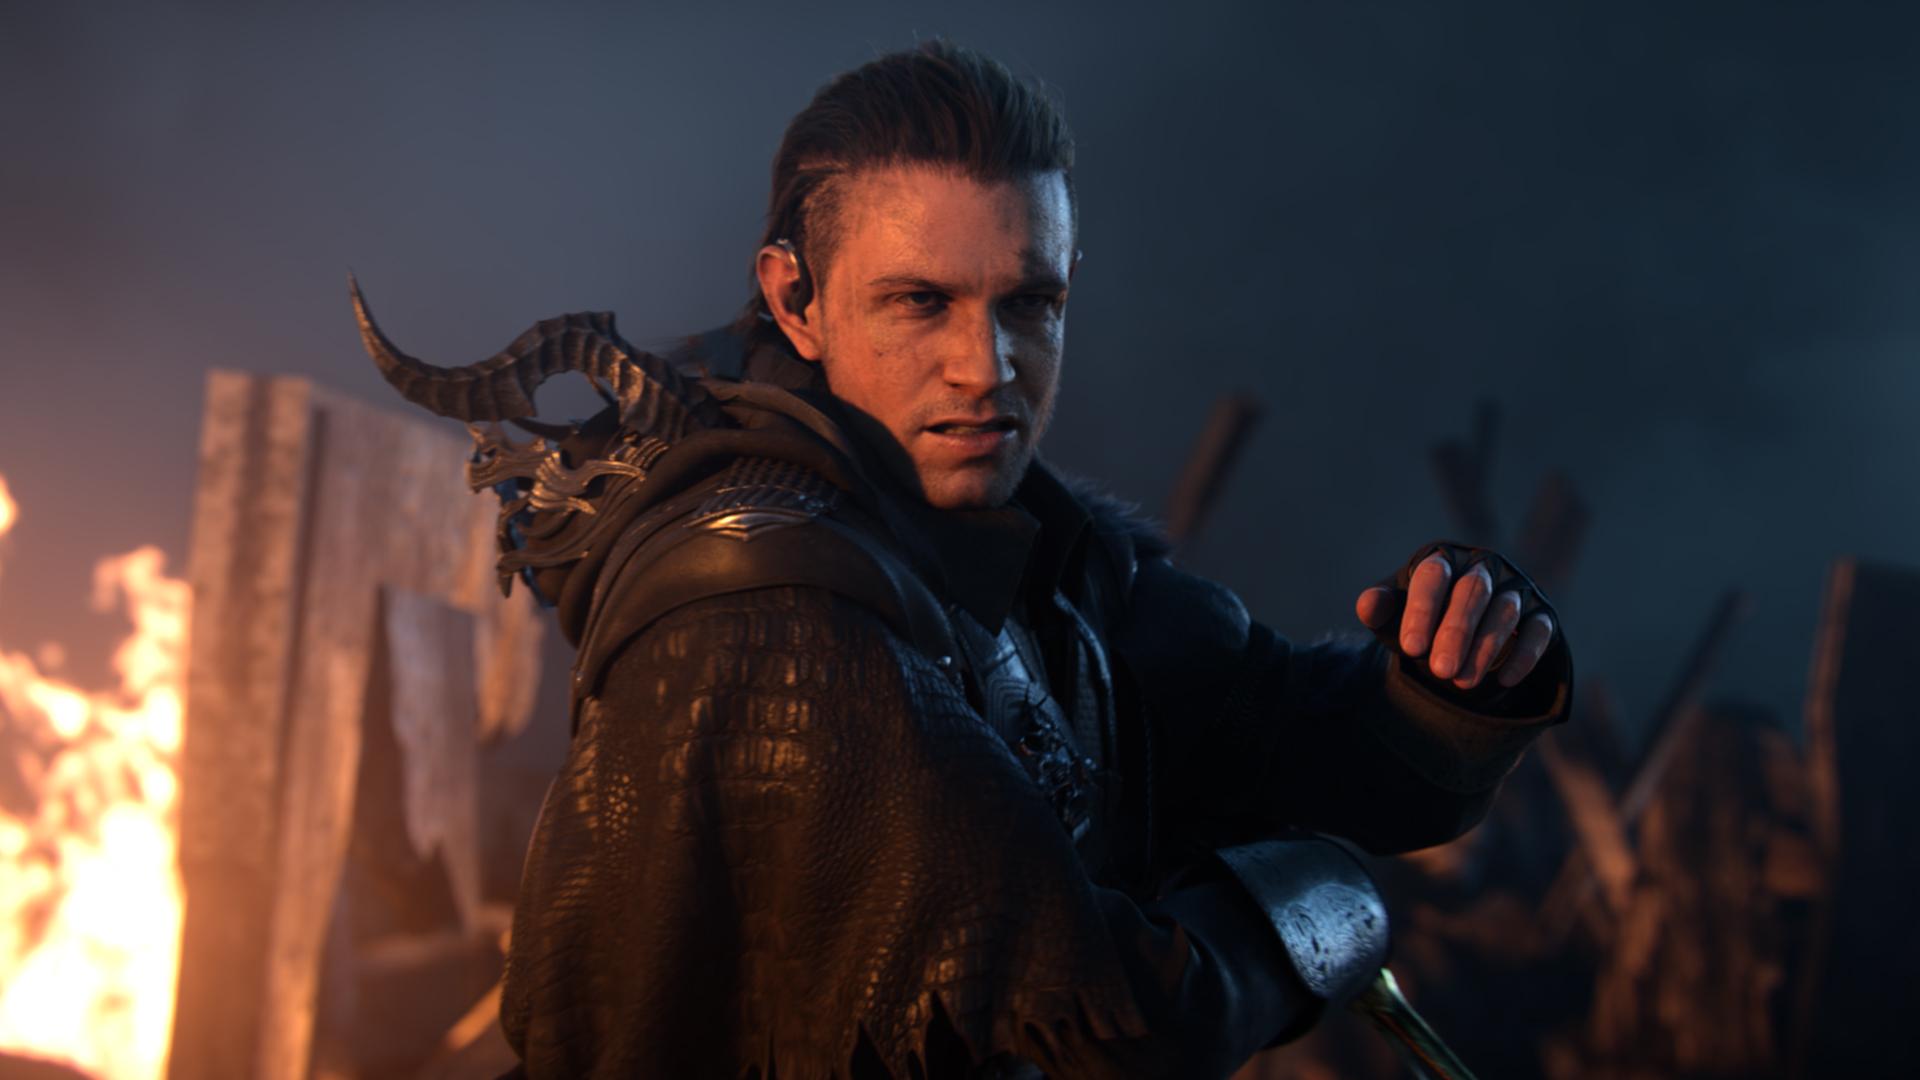 Behind the scenes of the software in Square Enix's Final Fantasy XV Kingsglaive